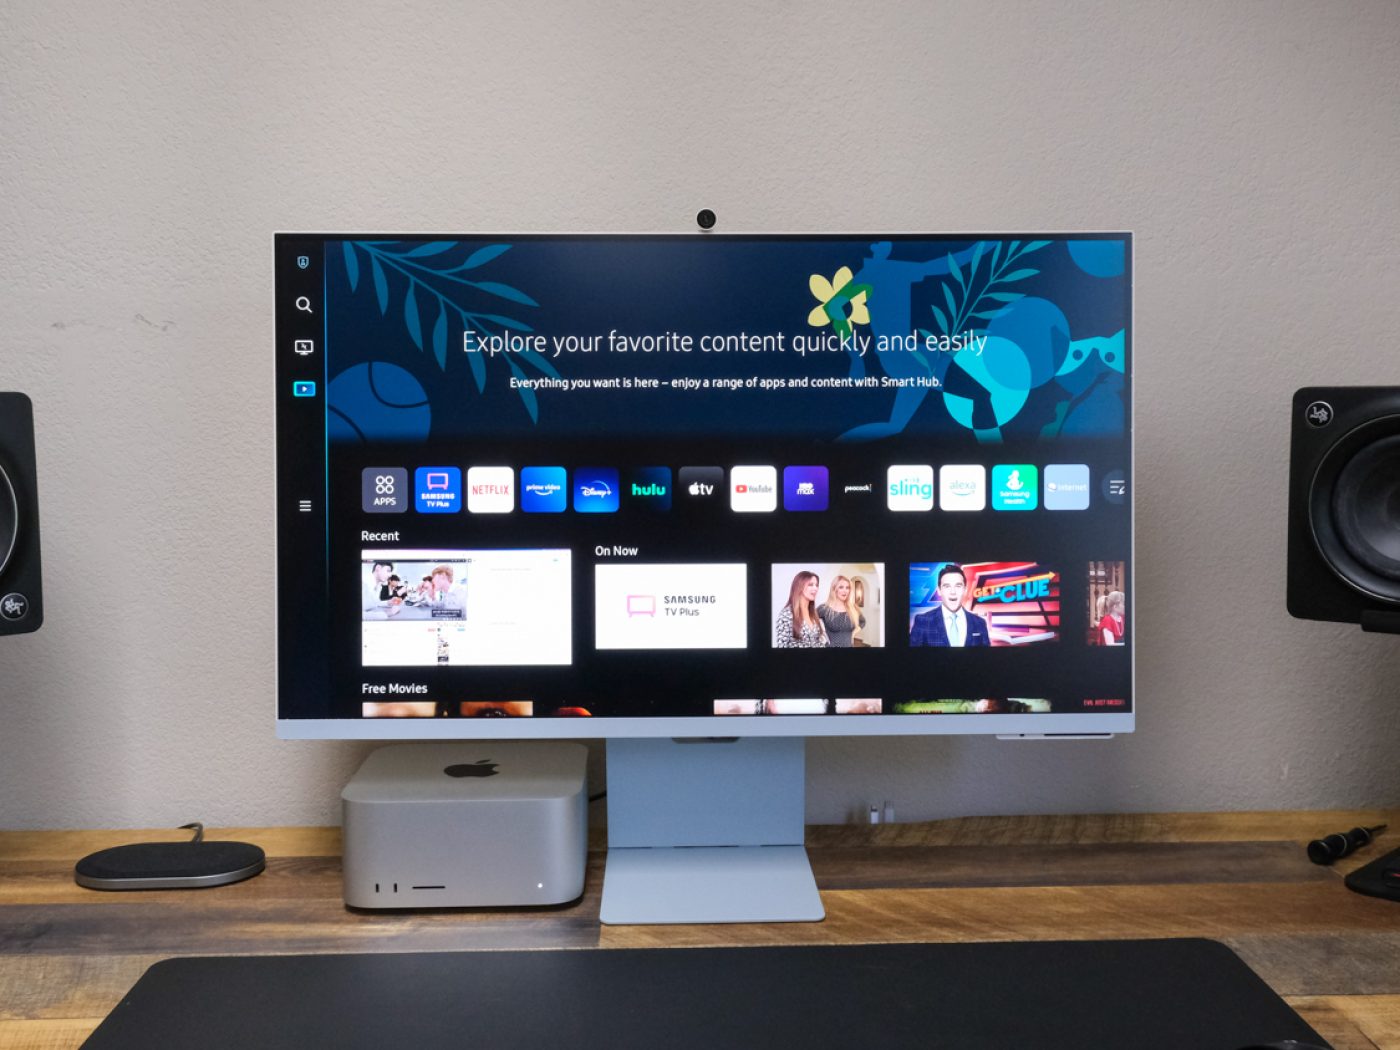 Samsung's new Smart Monitor M8 is the next best thing to a 32-inch iMac